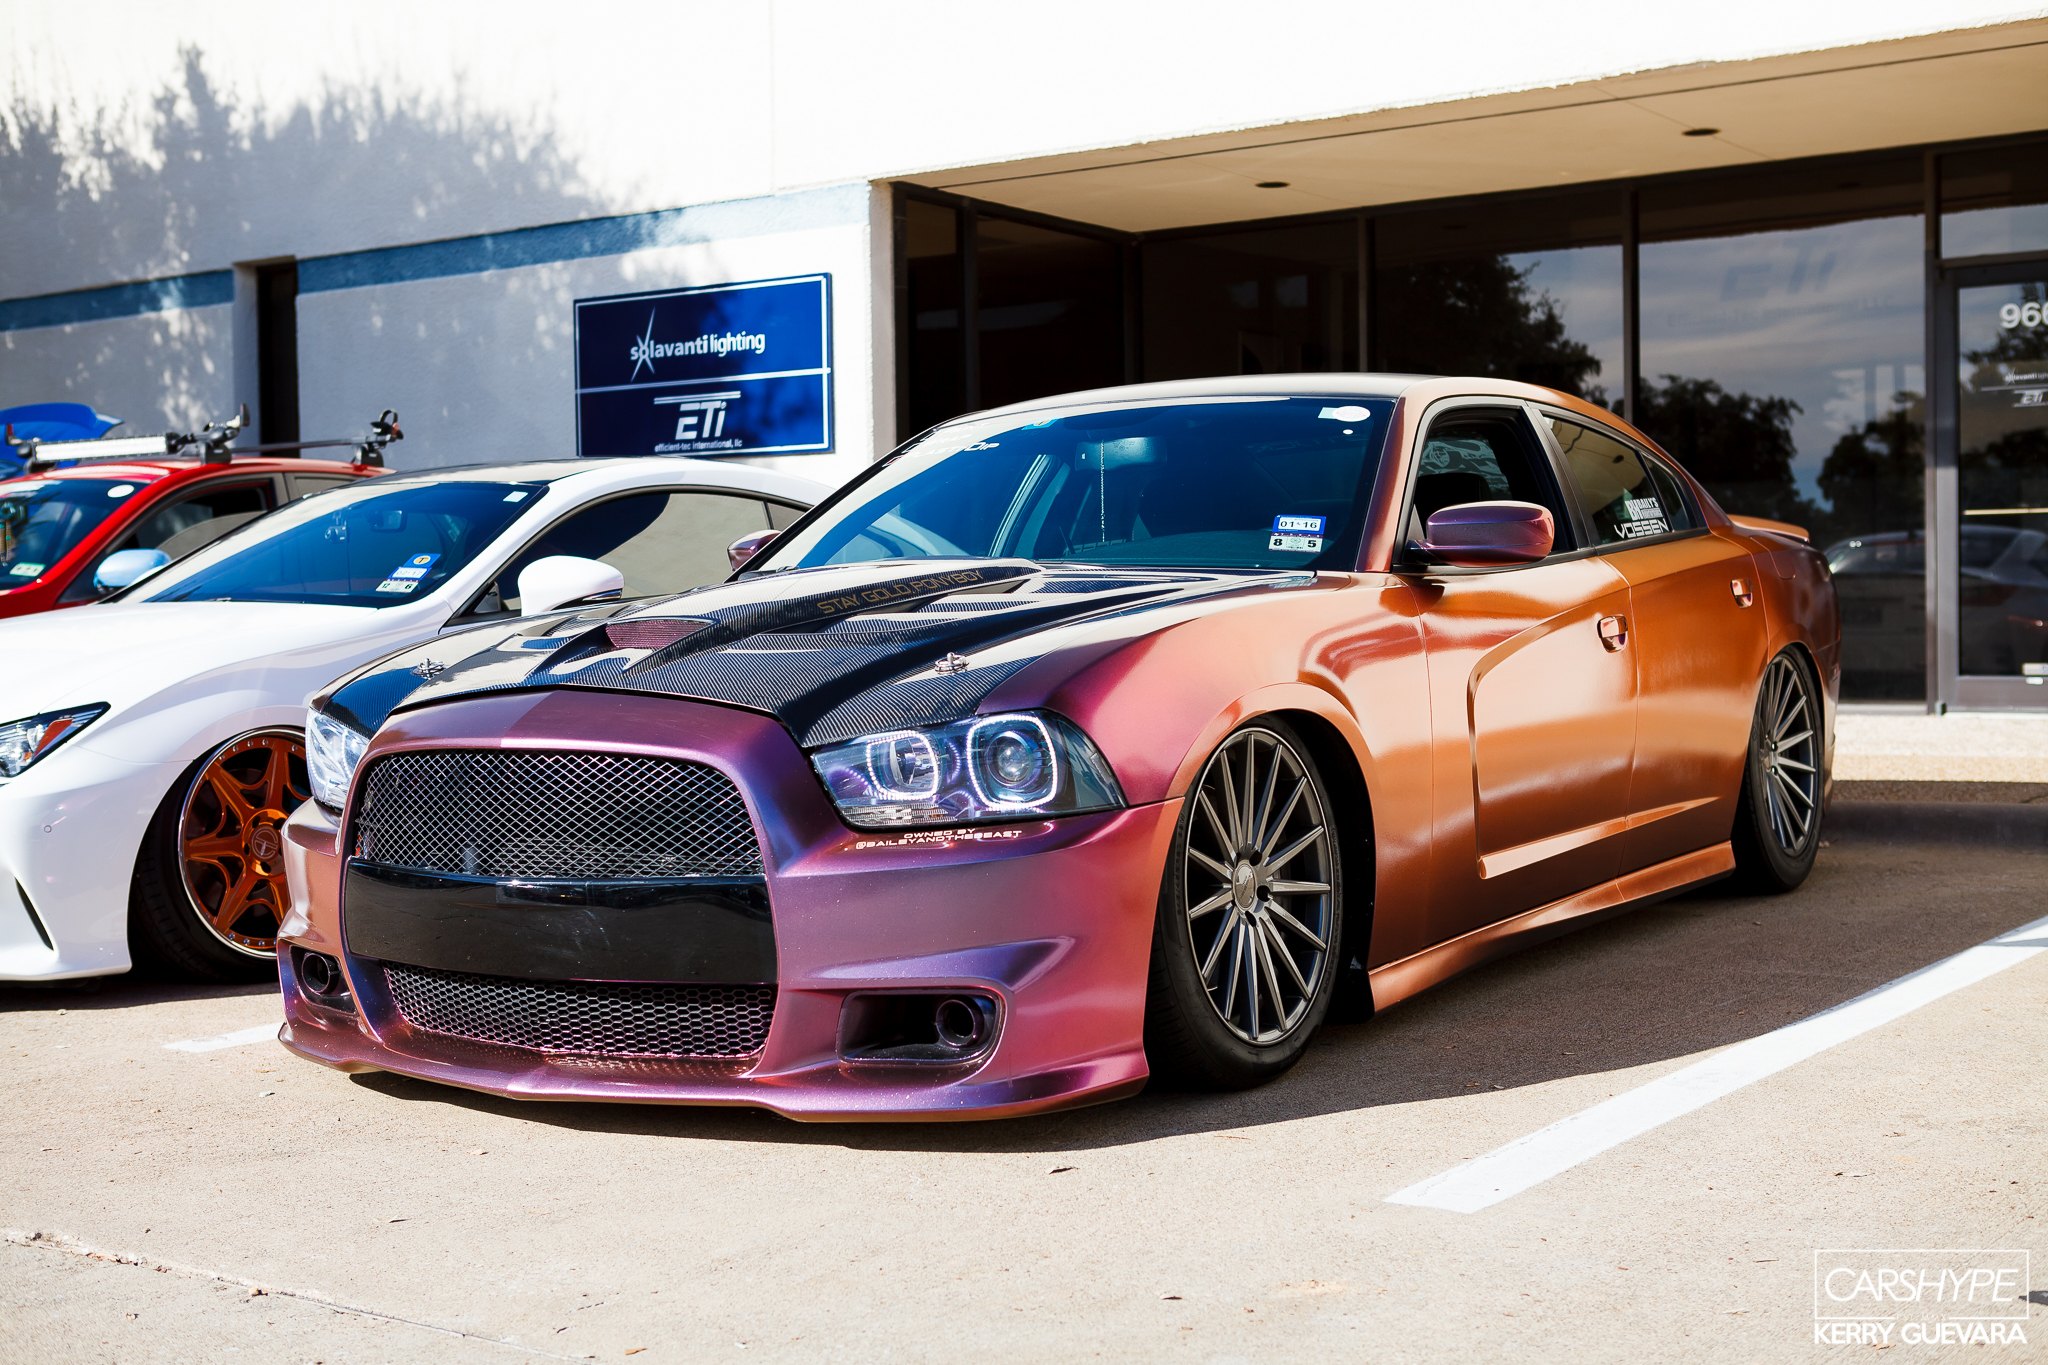 Purple Stanced Charger with SMD Halos on Air Suspension - Photo by Kerry Gu...